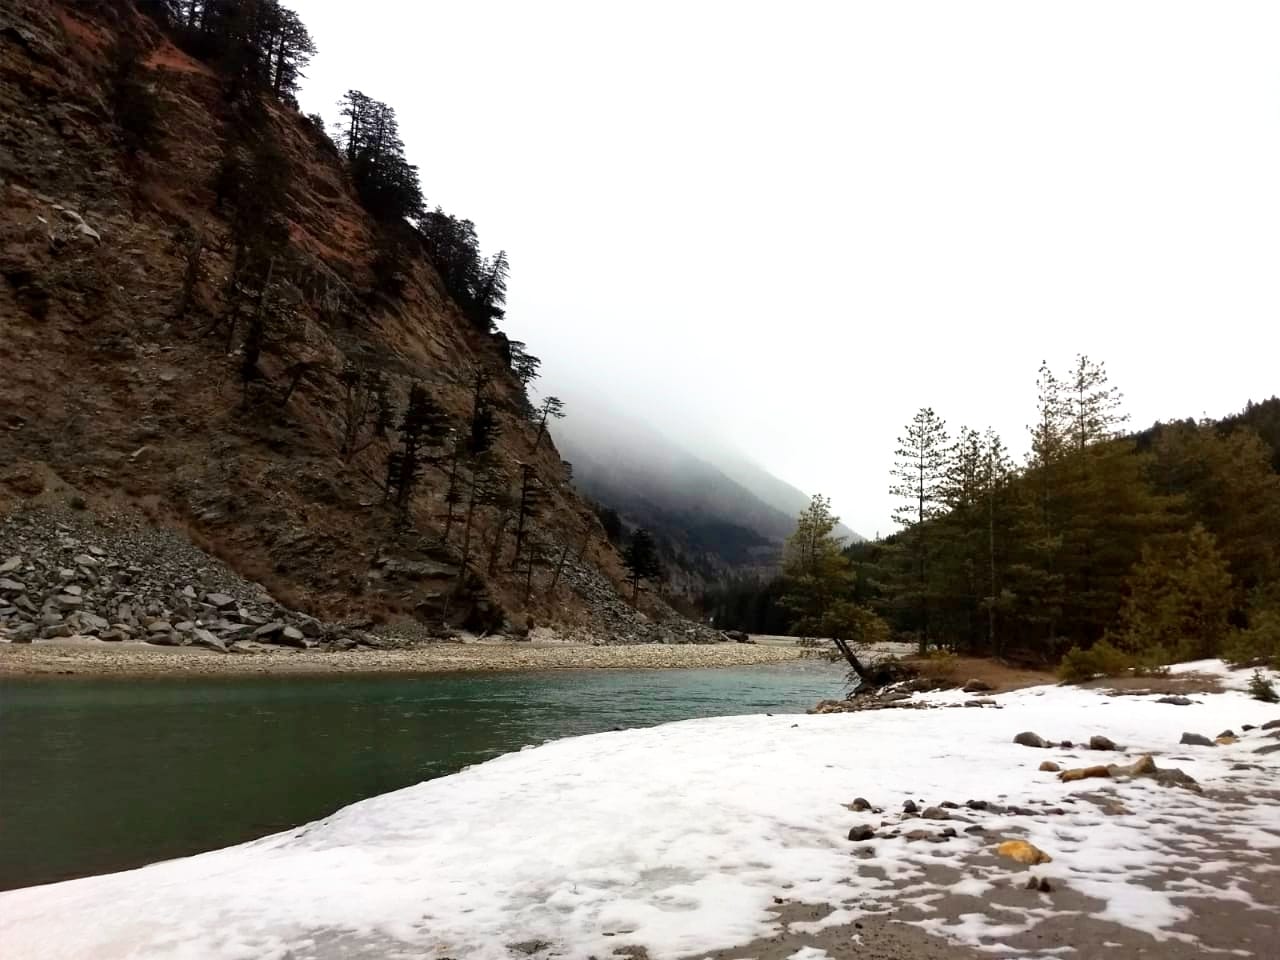 Bhagirathi river flows in the snow covered Harsil valley